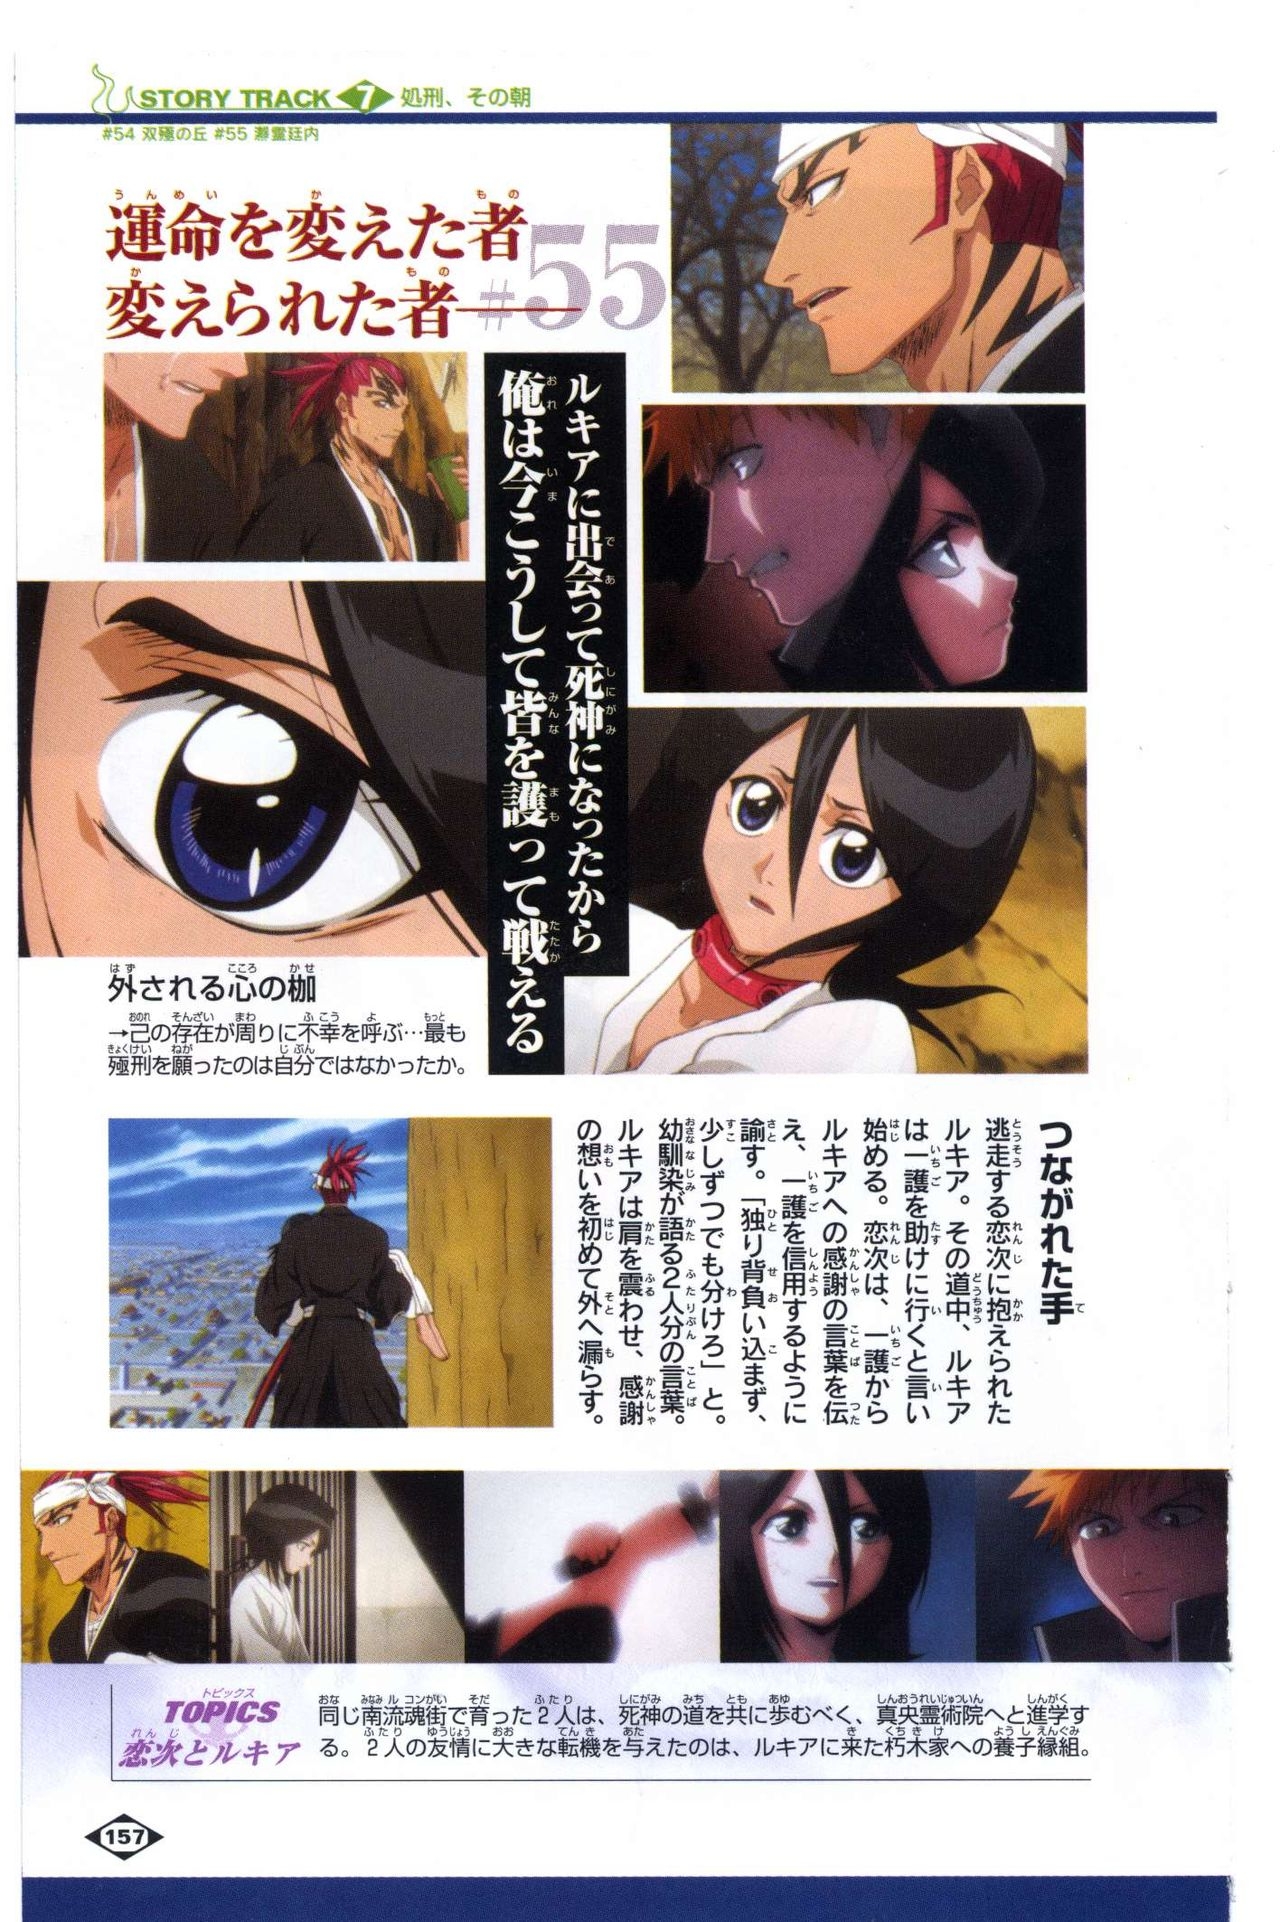 Bleach: Official Animation Book VIBEs 157